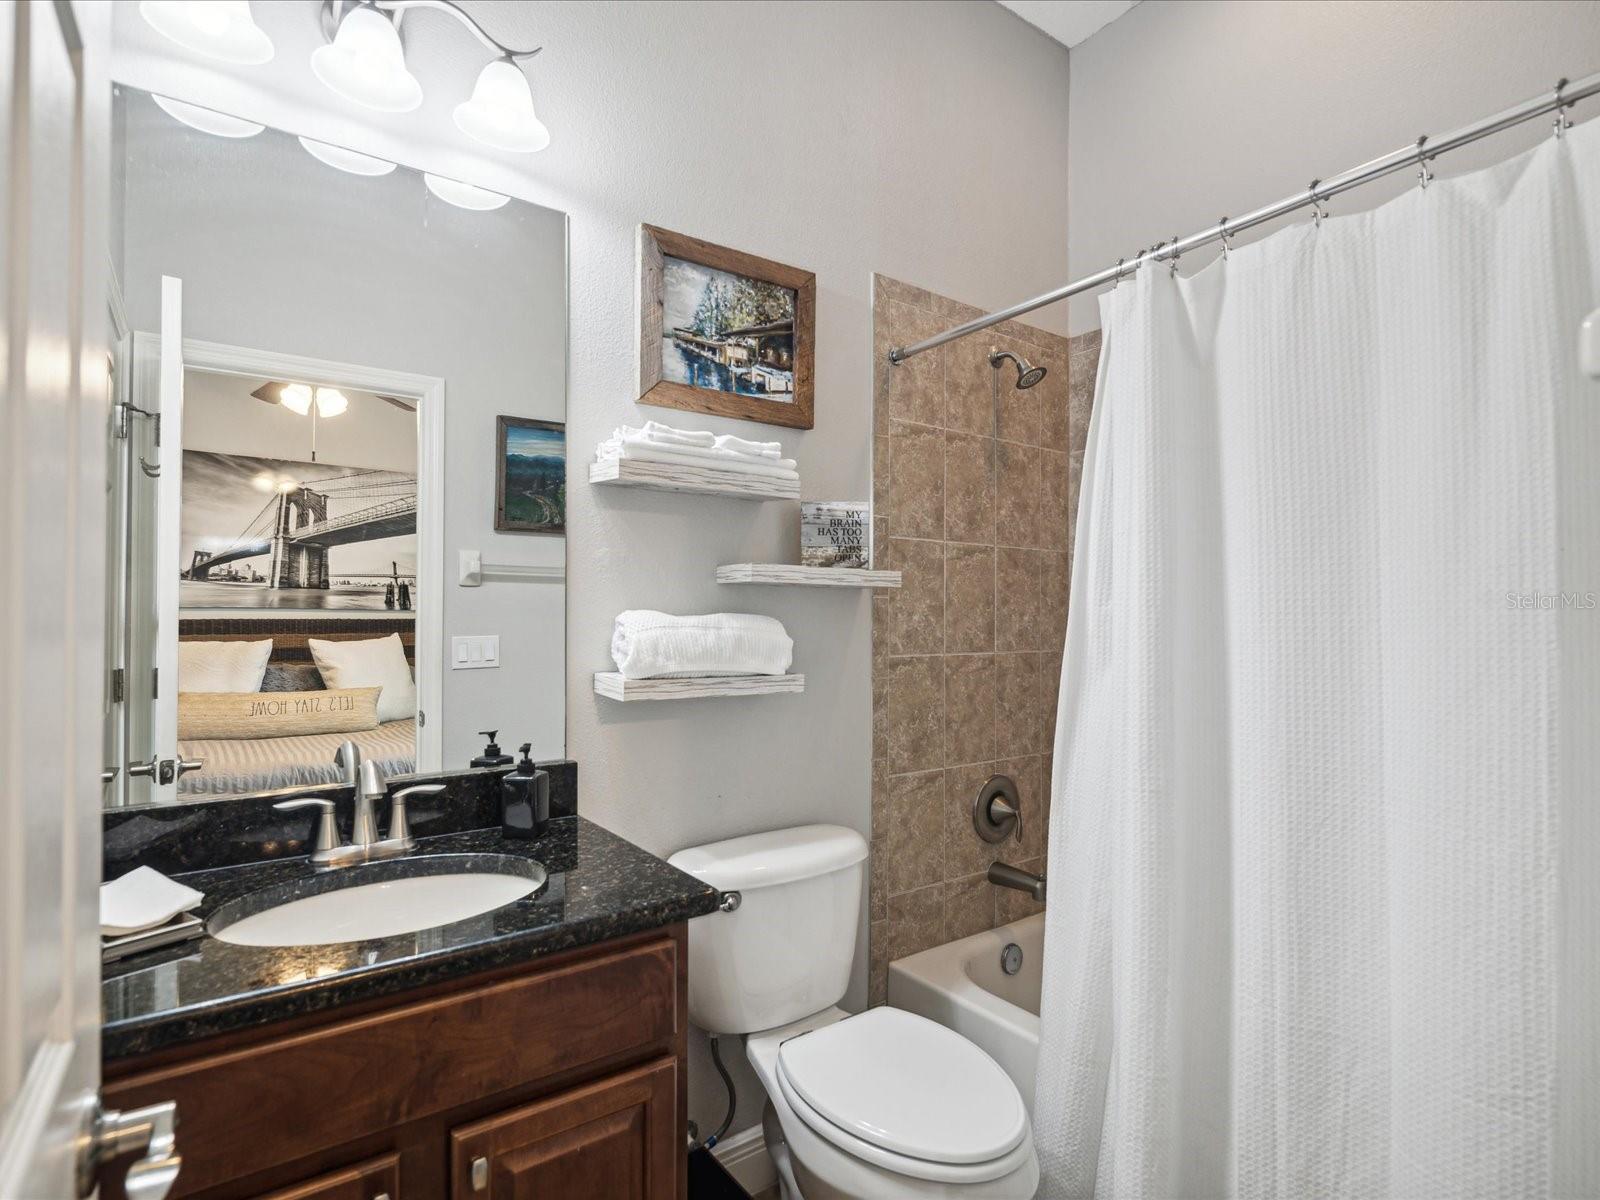 The bathroom features a bathtub/shower combination and granite countertop with a cherry cabinet for storage.